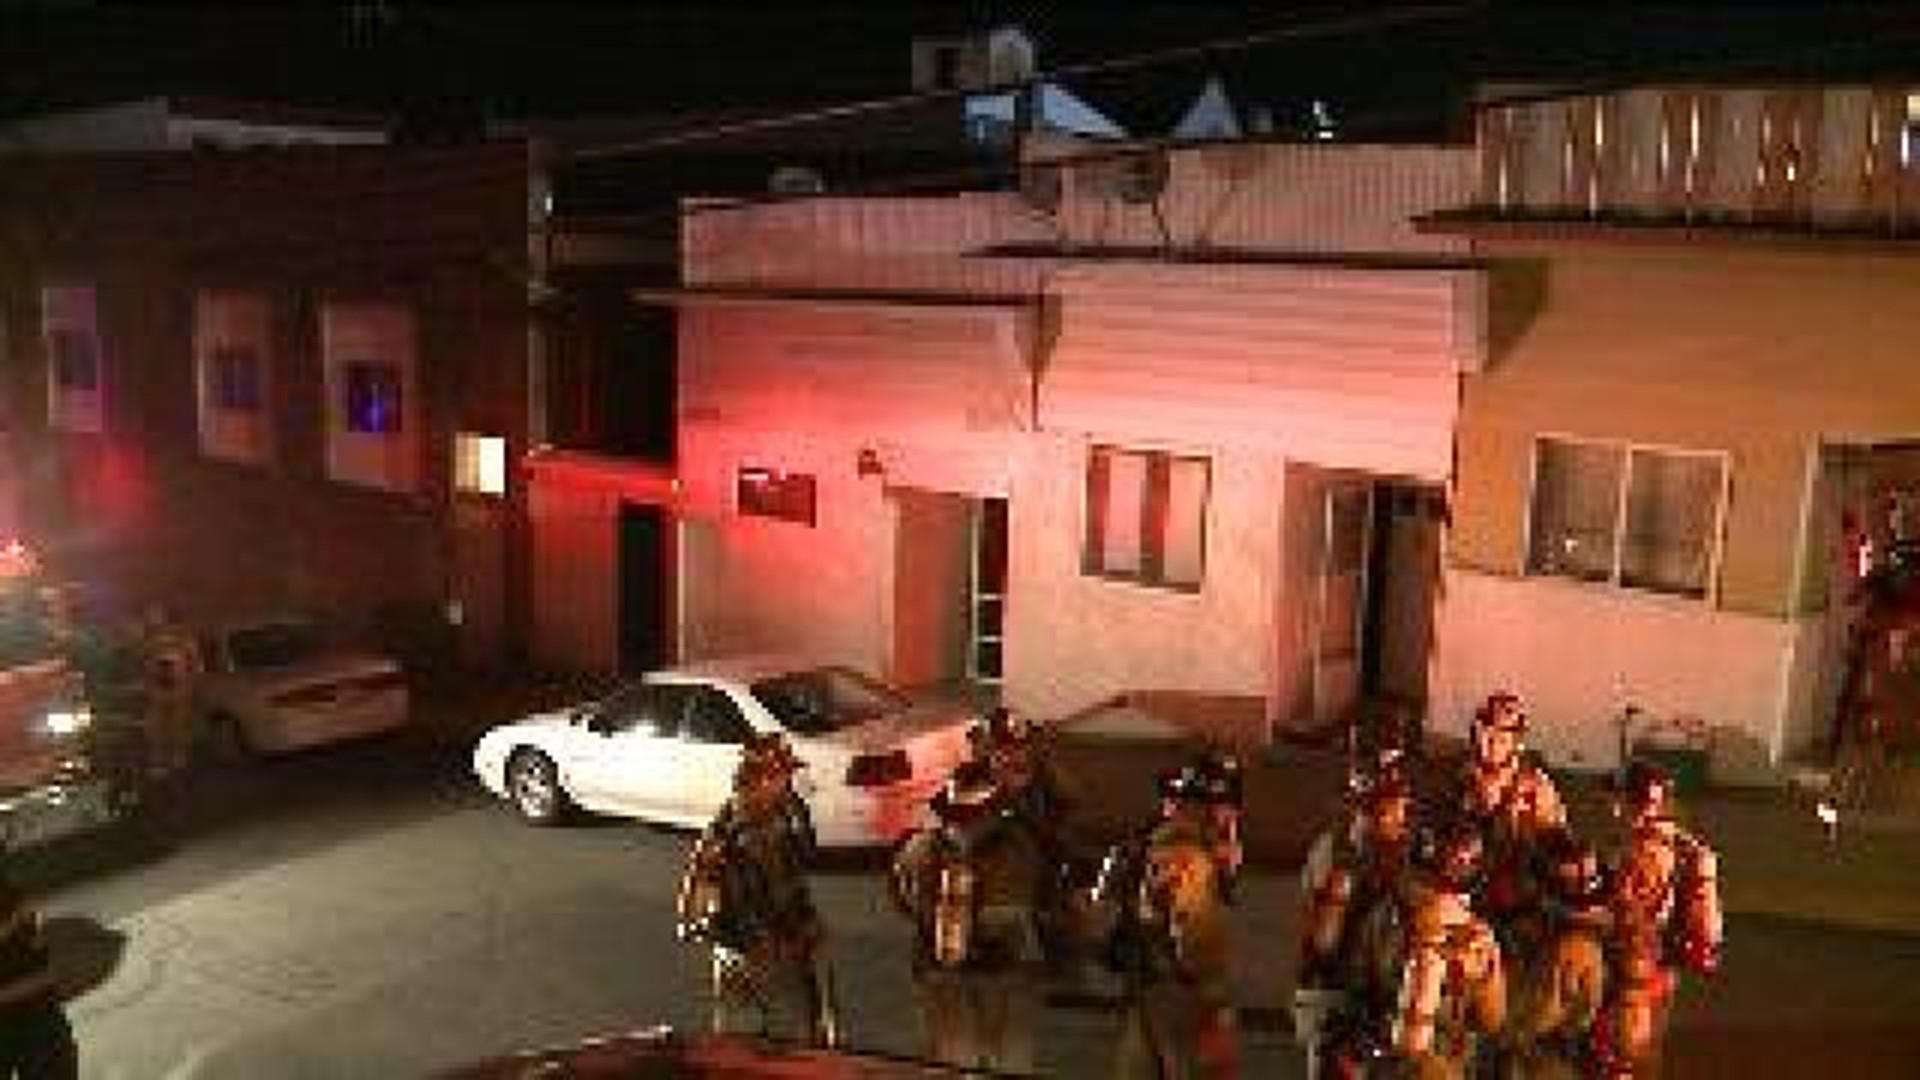 Flames Start In Basement of Luzerne County Business